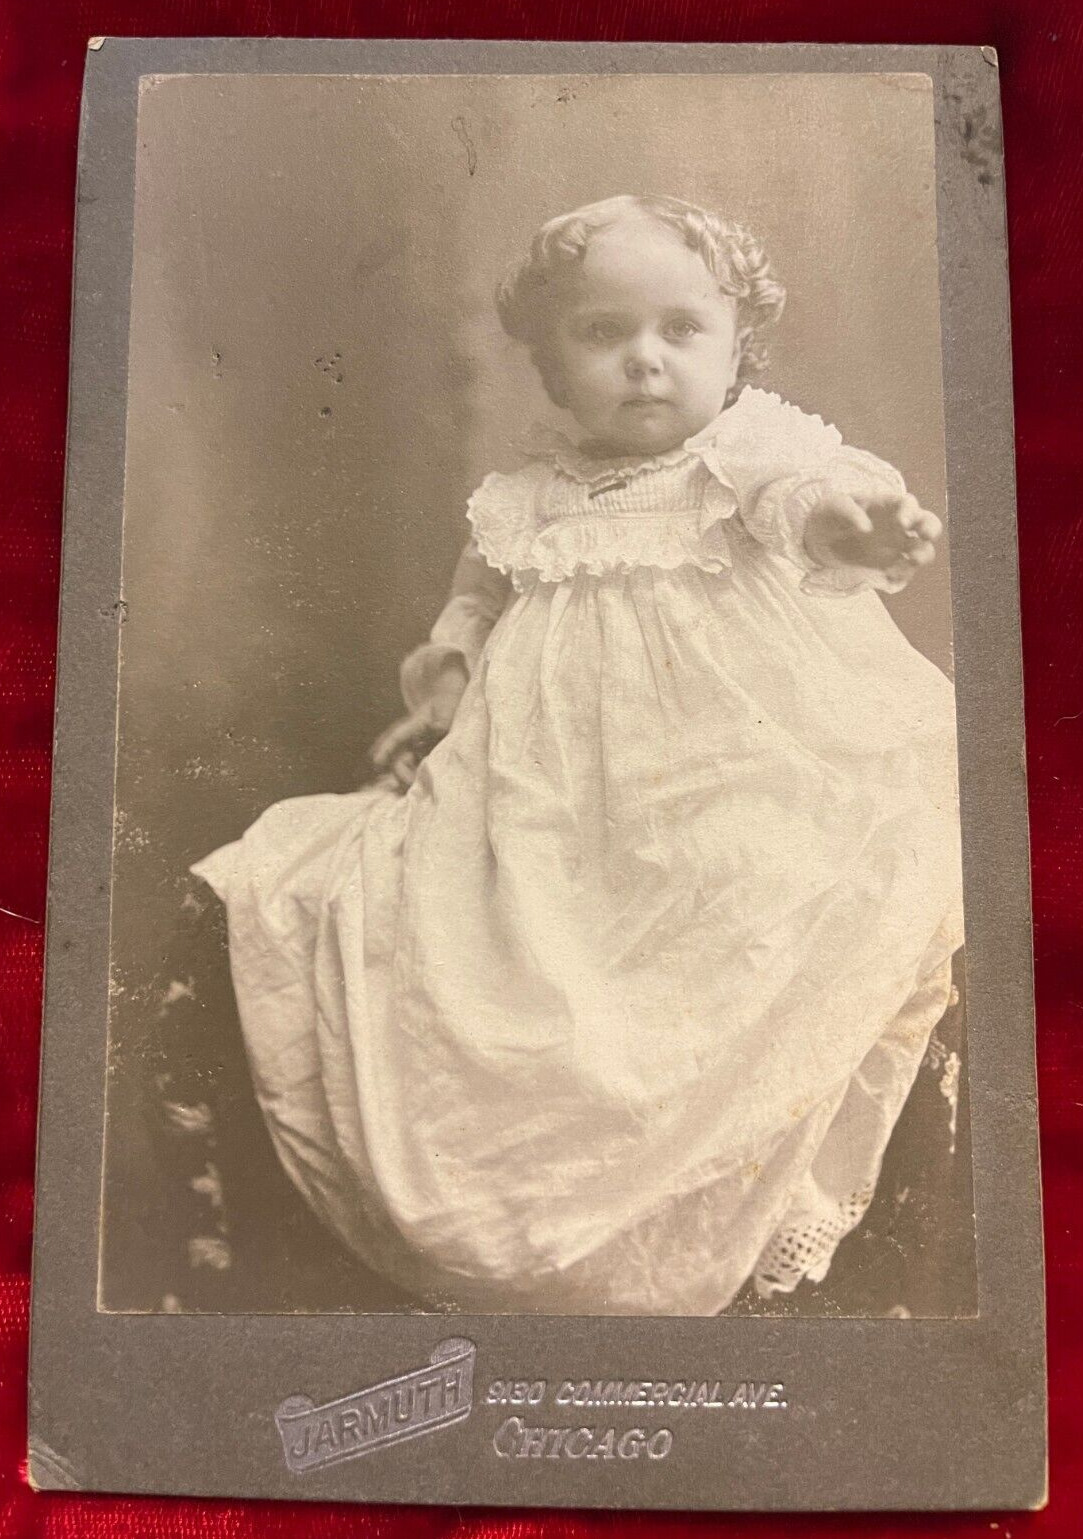 RARE c.1880\'s CABINET CARD ADORABLE BABY REACHING OUT JARMUTH CHICAGO ILLINOIS